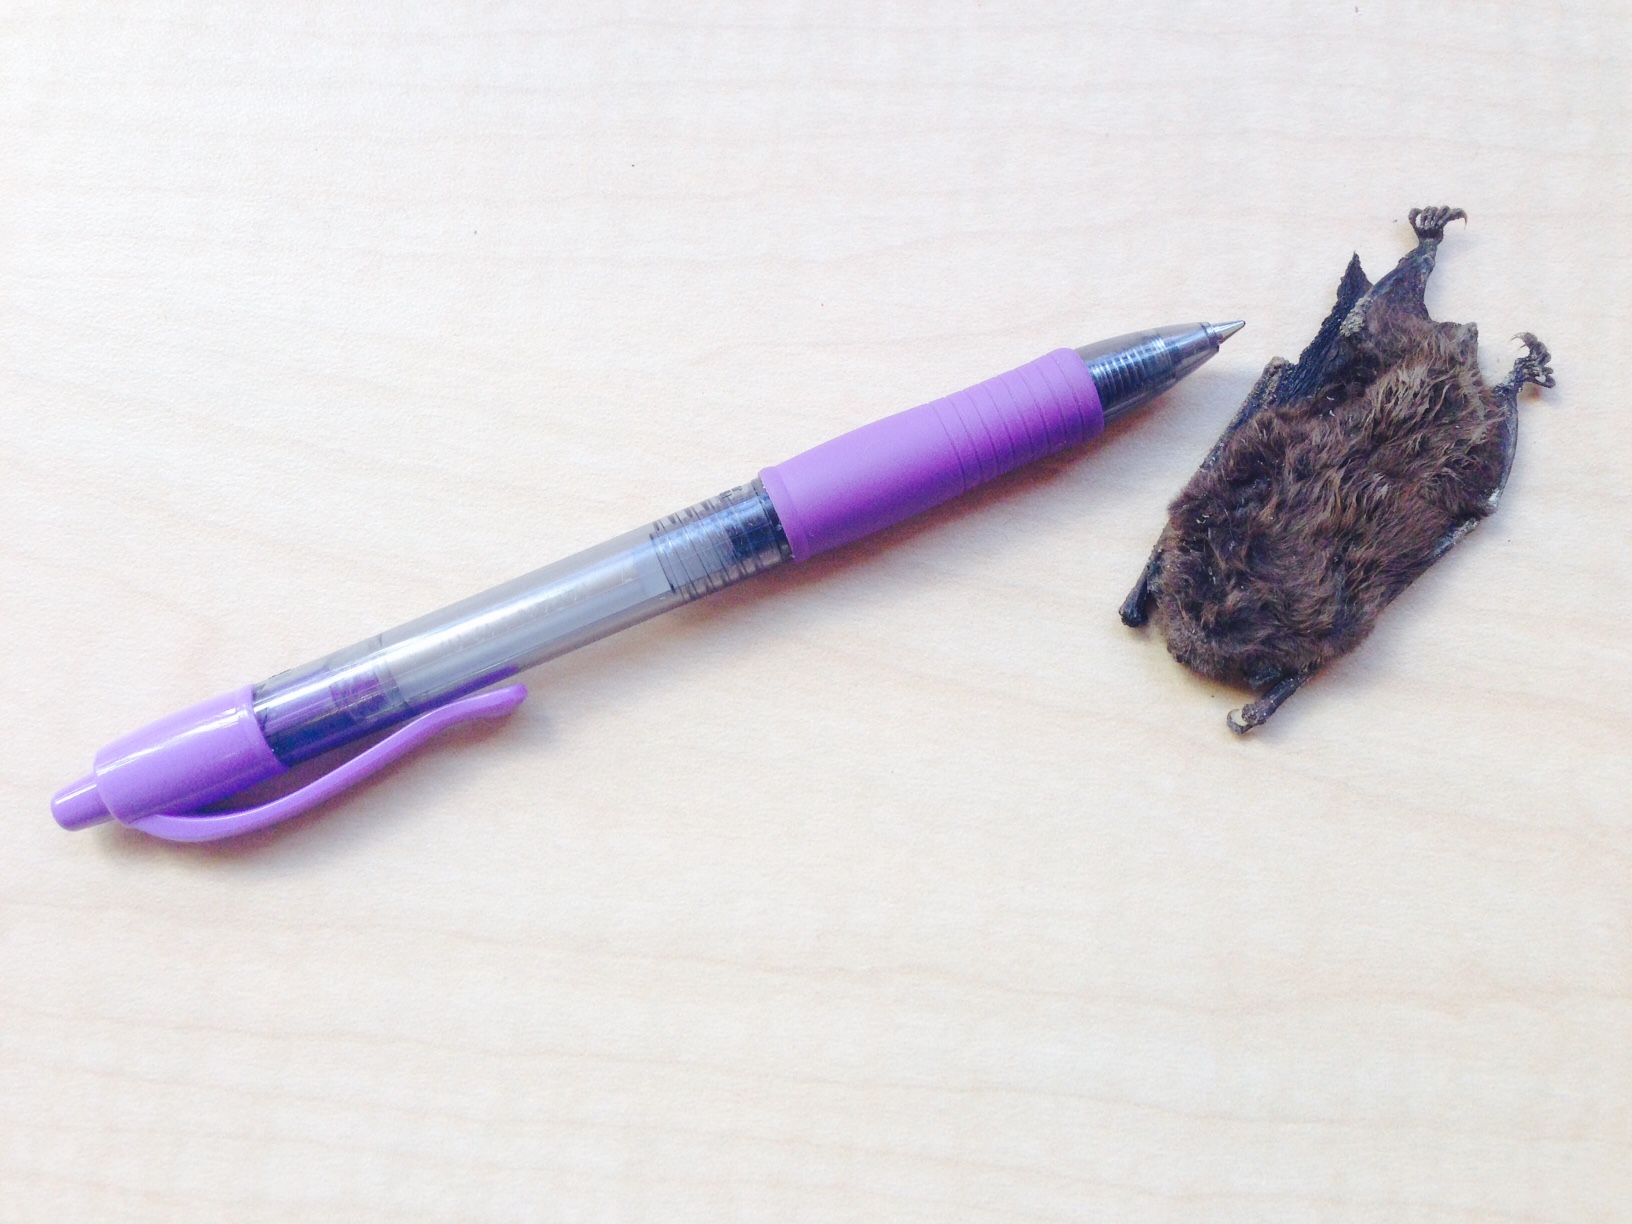 The carcass of this small brown bat compared to a pen. Alive they weigh between 5-7 grams. (Photo by Angela Denning, KFSK - Petersburg)